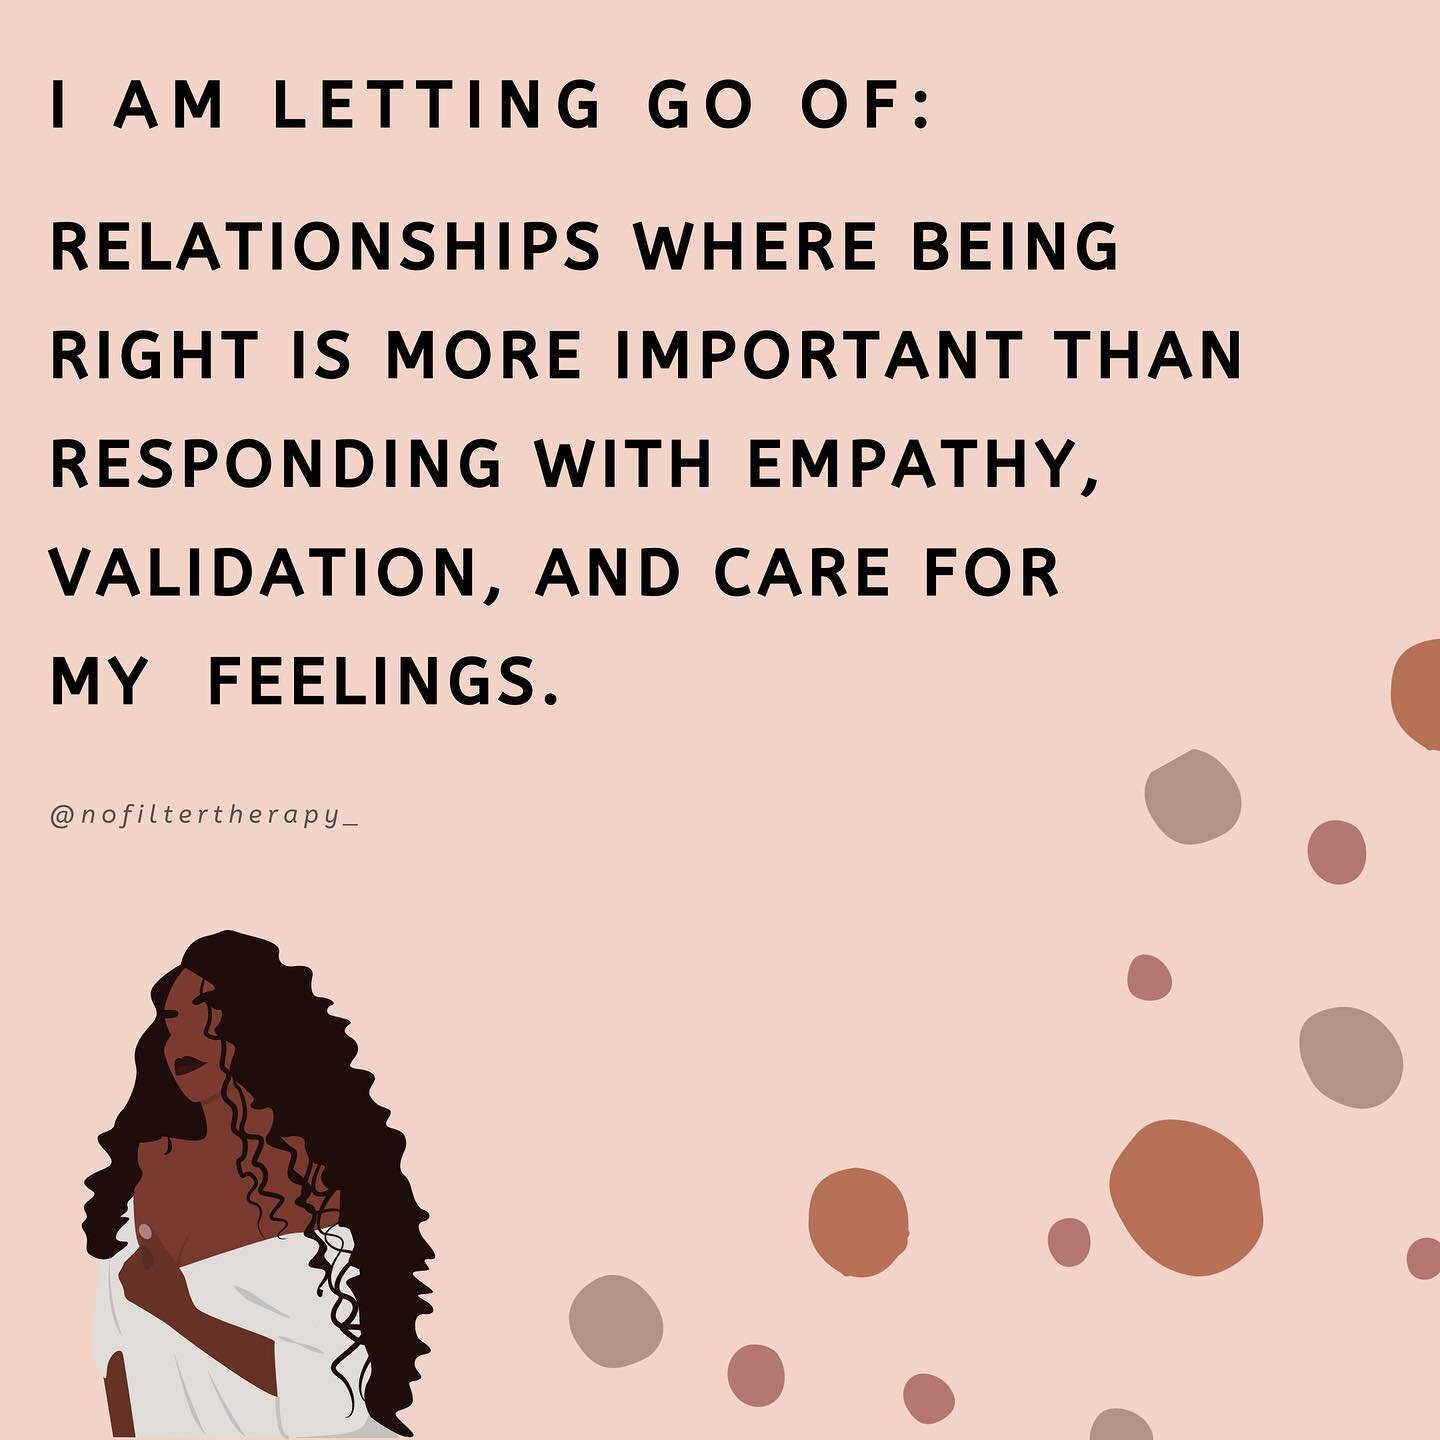 😔 Letting go of relationships that no longer serve you can be difficult. Holding on tightly to what should be released can breed insecurity, resentment and anxiety. Ask yourself this:

1️⃣ What am I gaining by staying in this relationship?

2️⃣ What